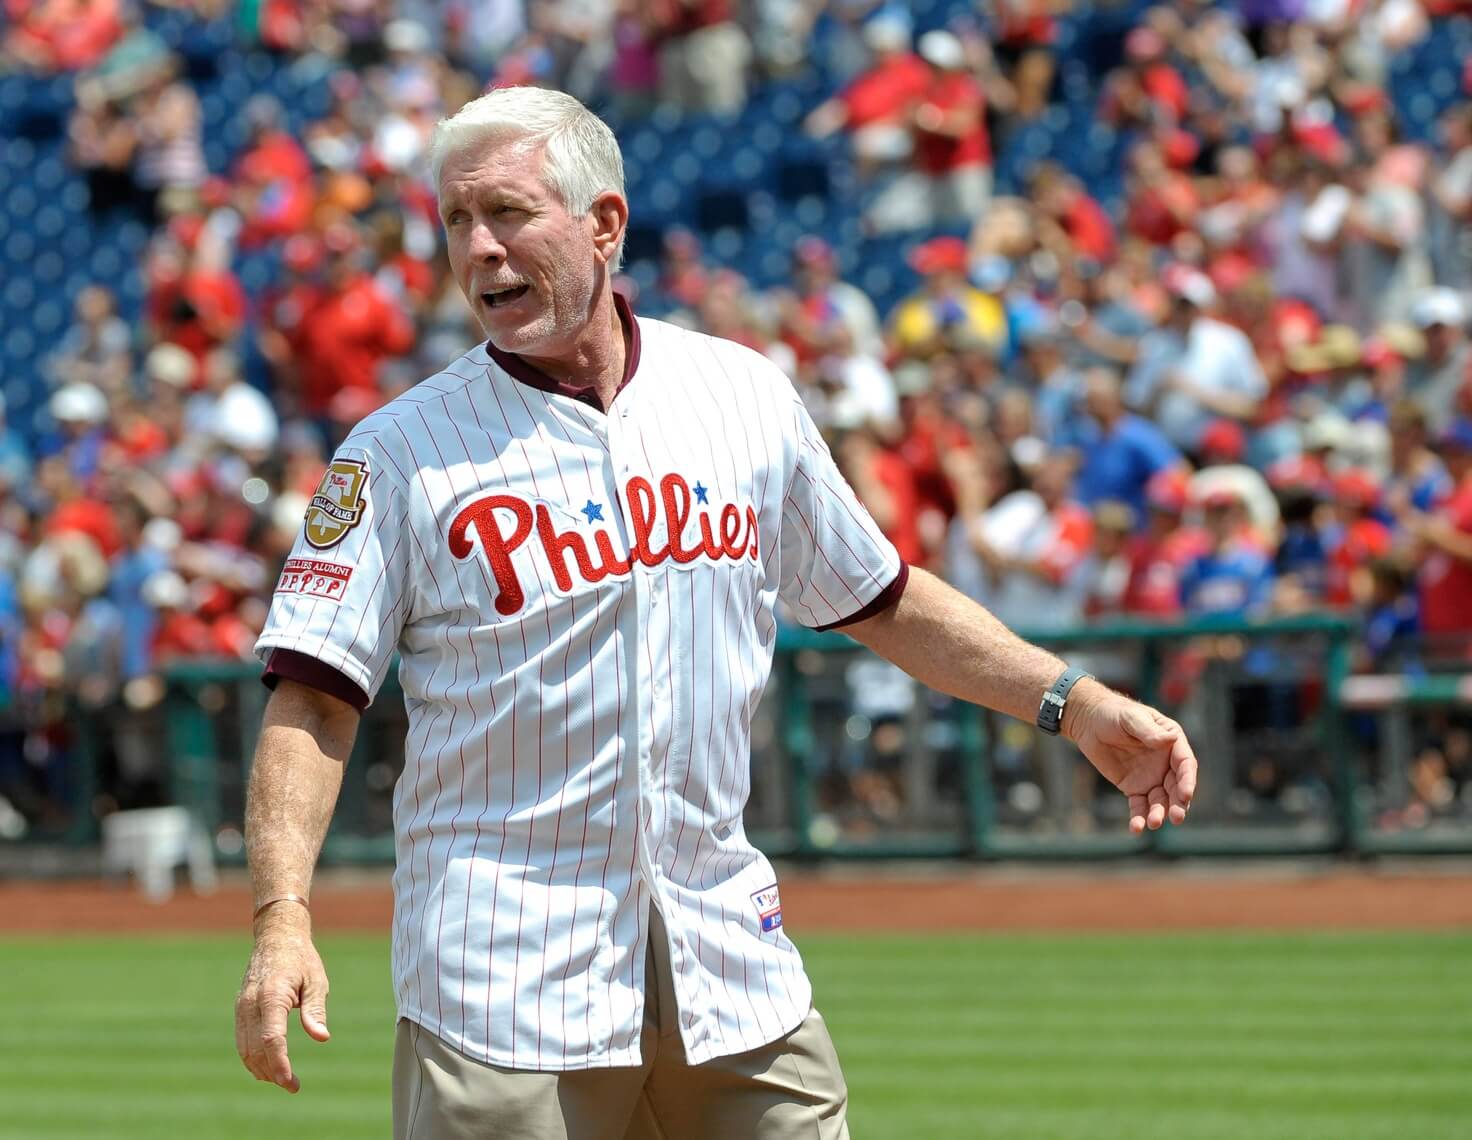 Mike Schmidt shows generational divide with comments on Phillies